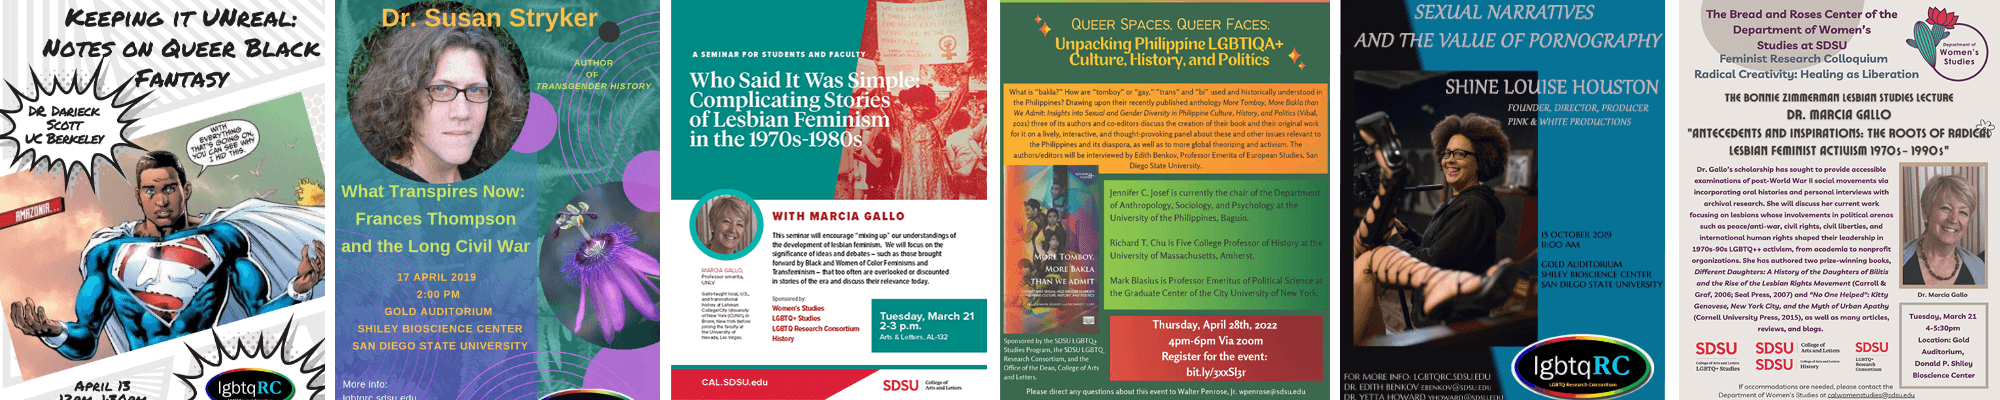 collage of past event flyers - see below for details about events